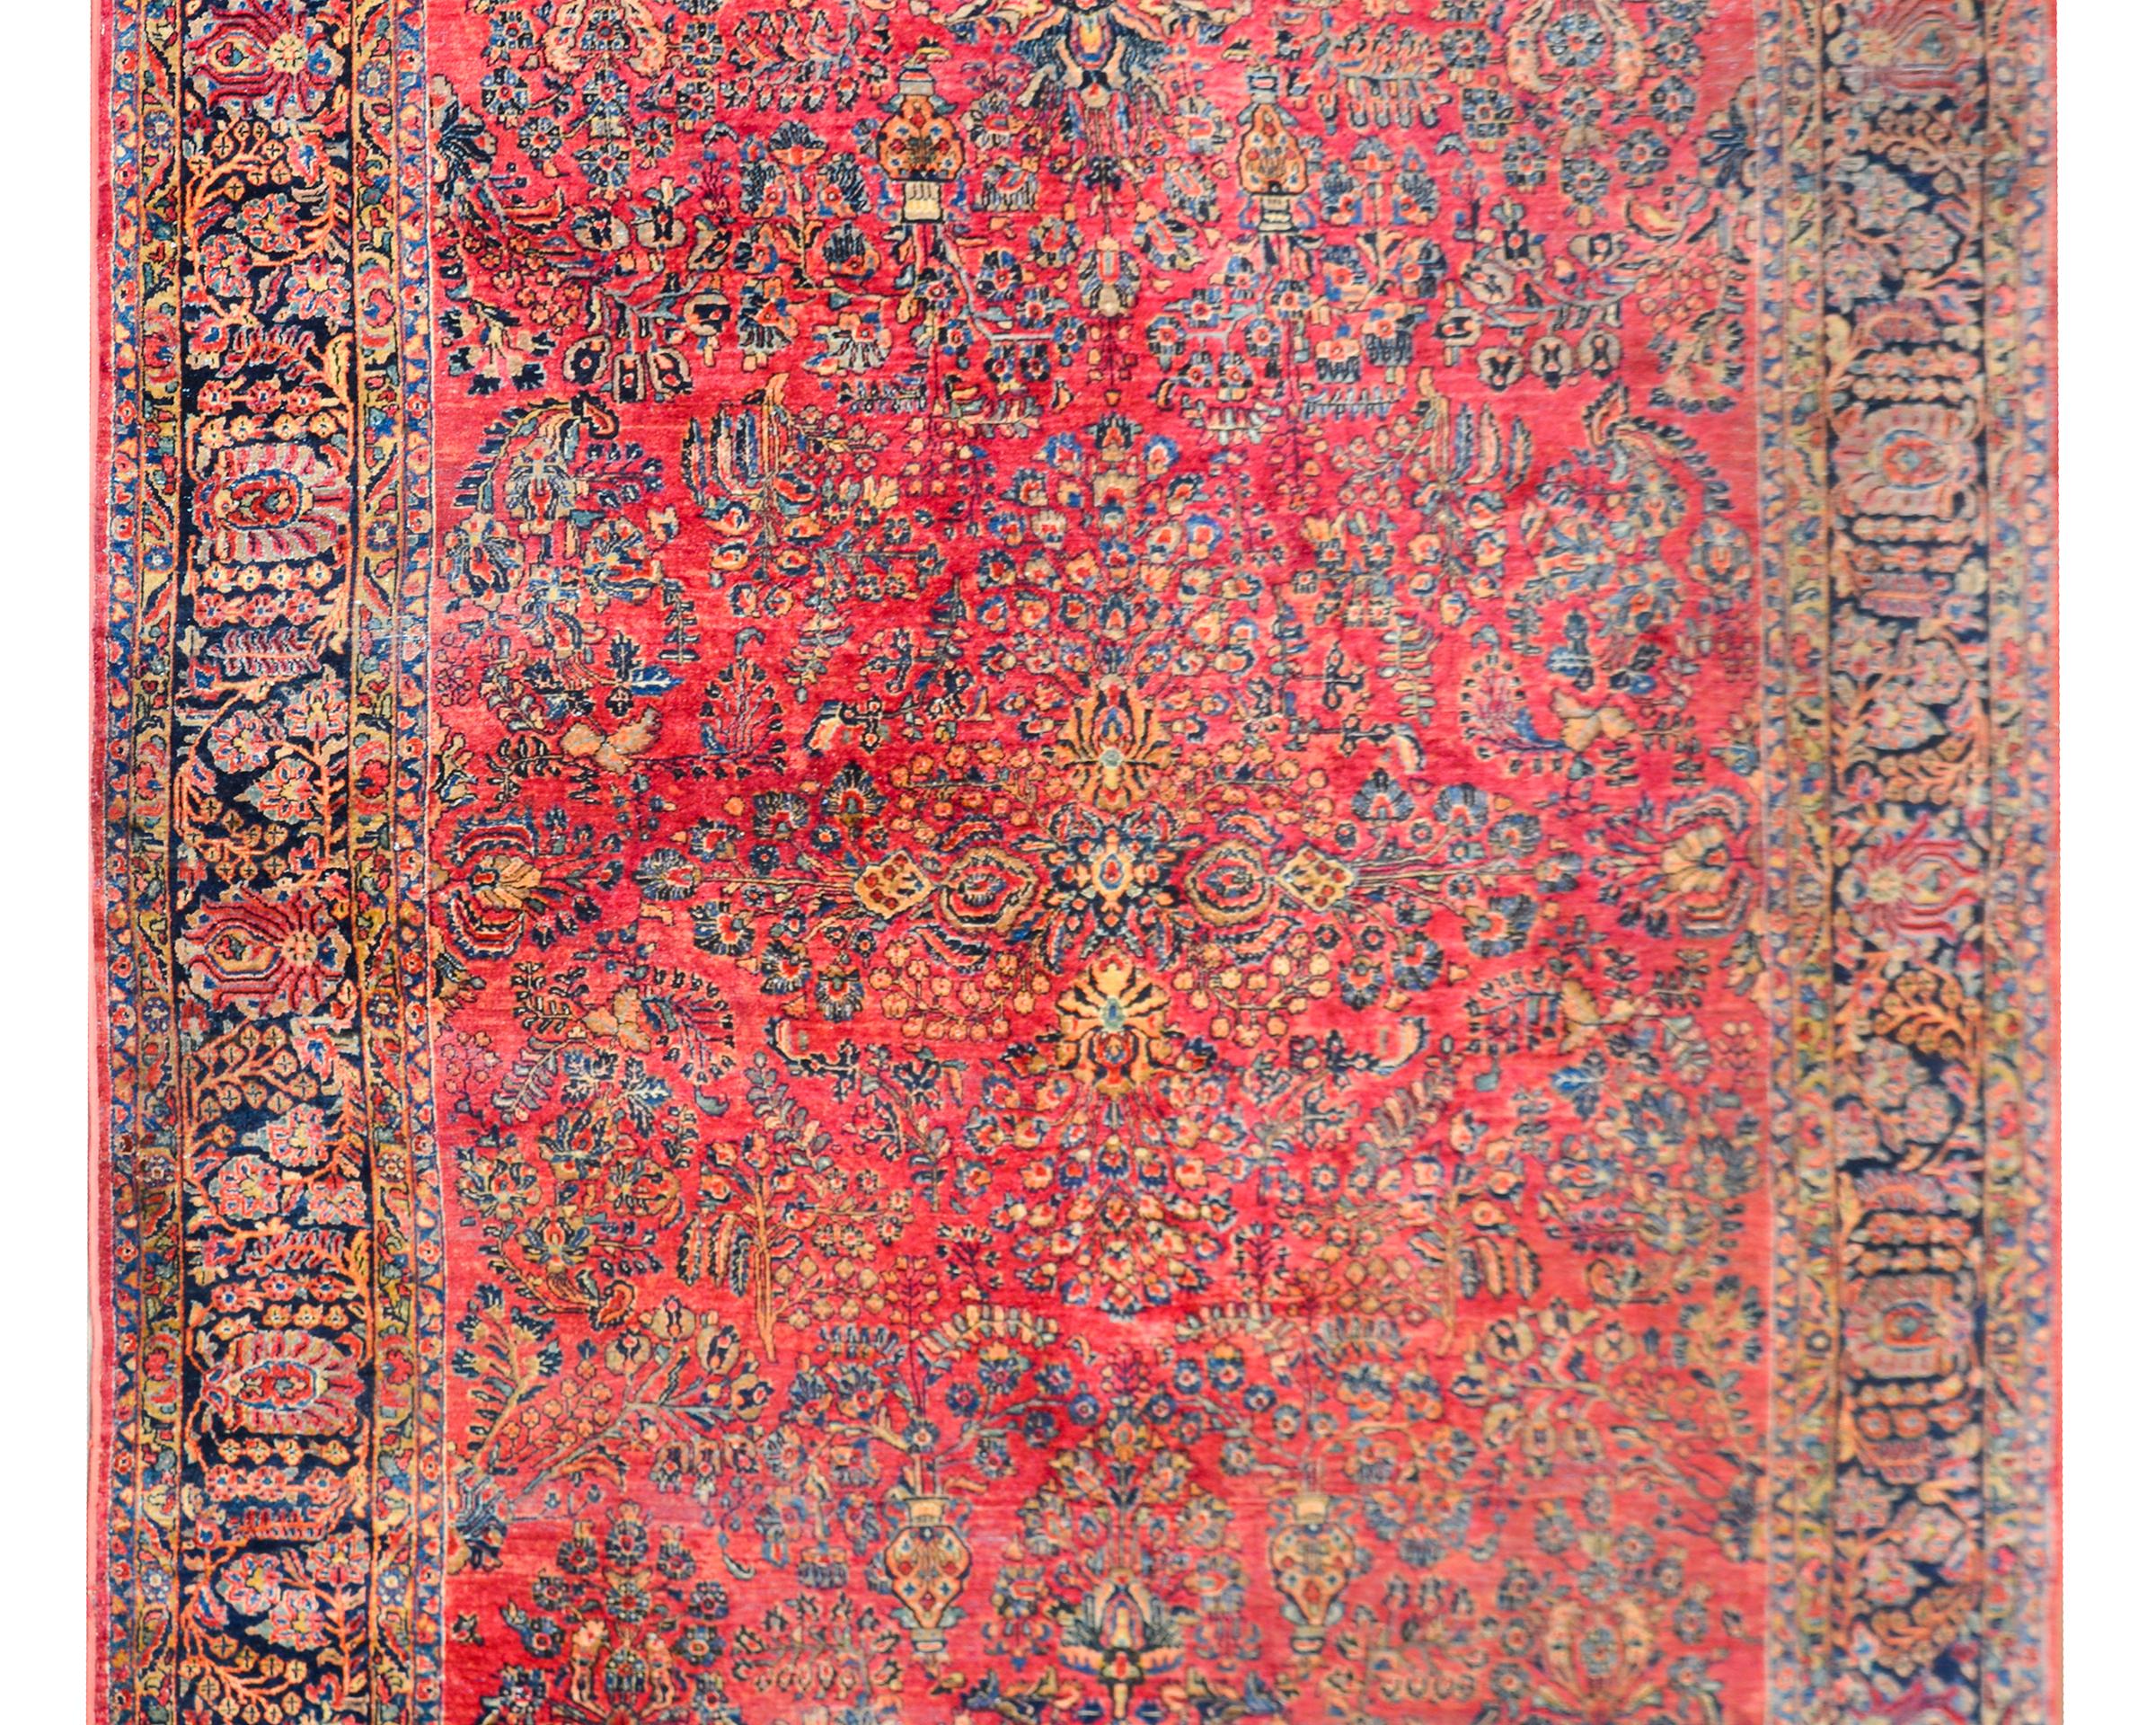 A wonderful early 20th century Persian Sarouk rug with a traditional mirrored floral cluster pattern woven in crimsons, pinks, light and dark indigos, and creams, set against a cranberry colored background, and surrounded by a wonderful wide floral